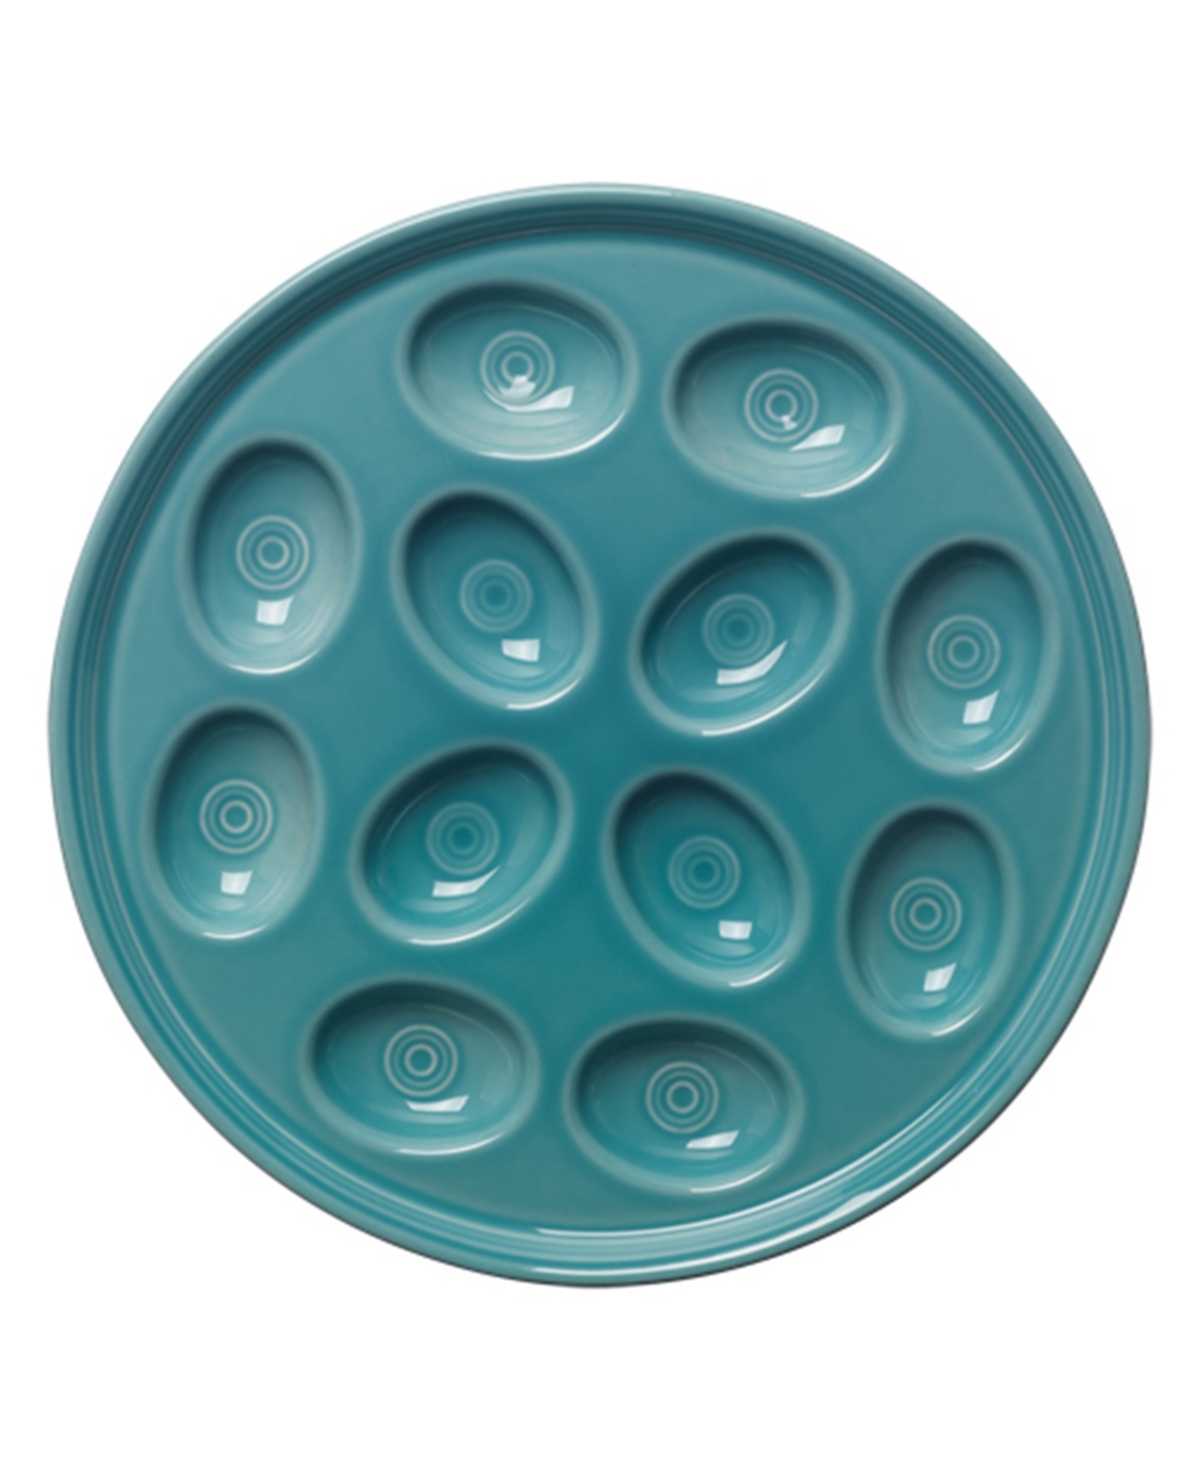 Fiesta Egg Plate In Turquoise